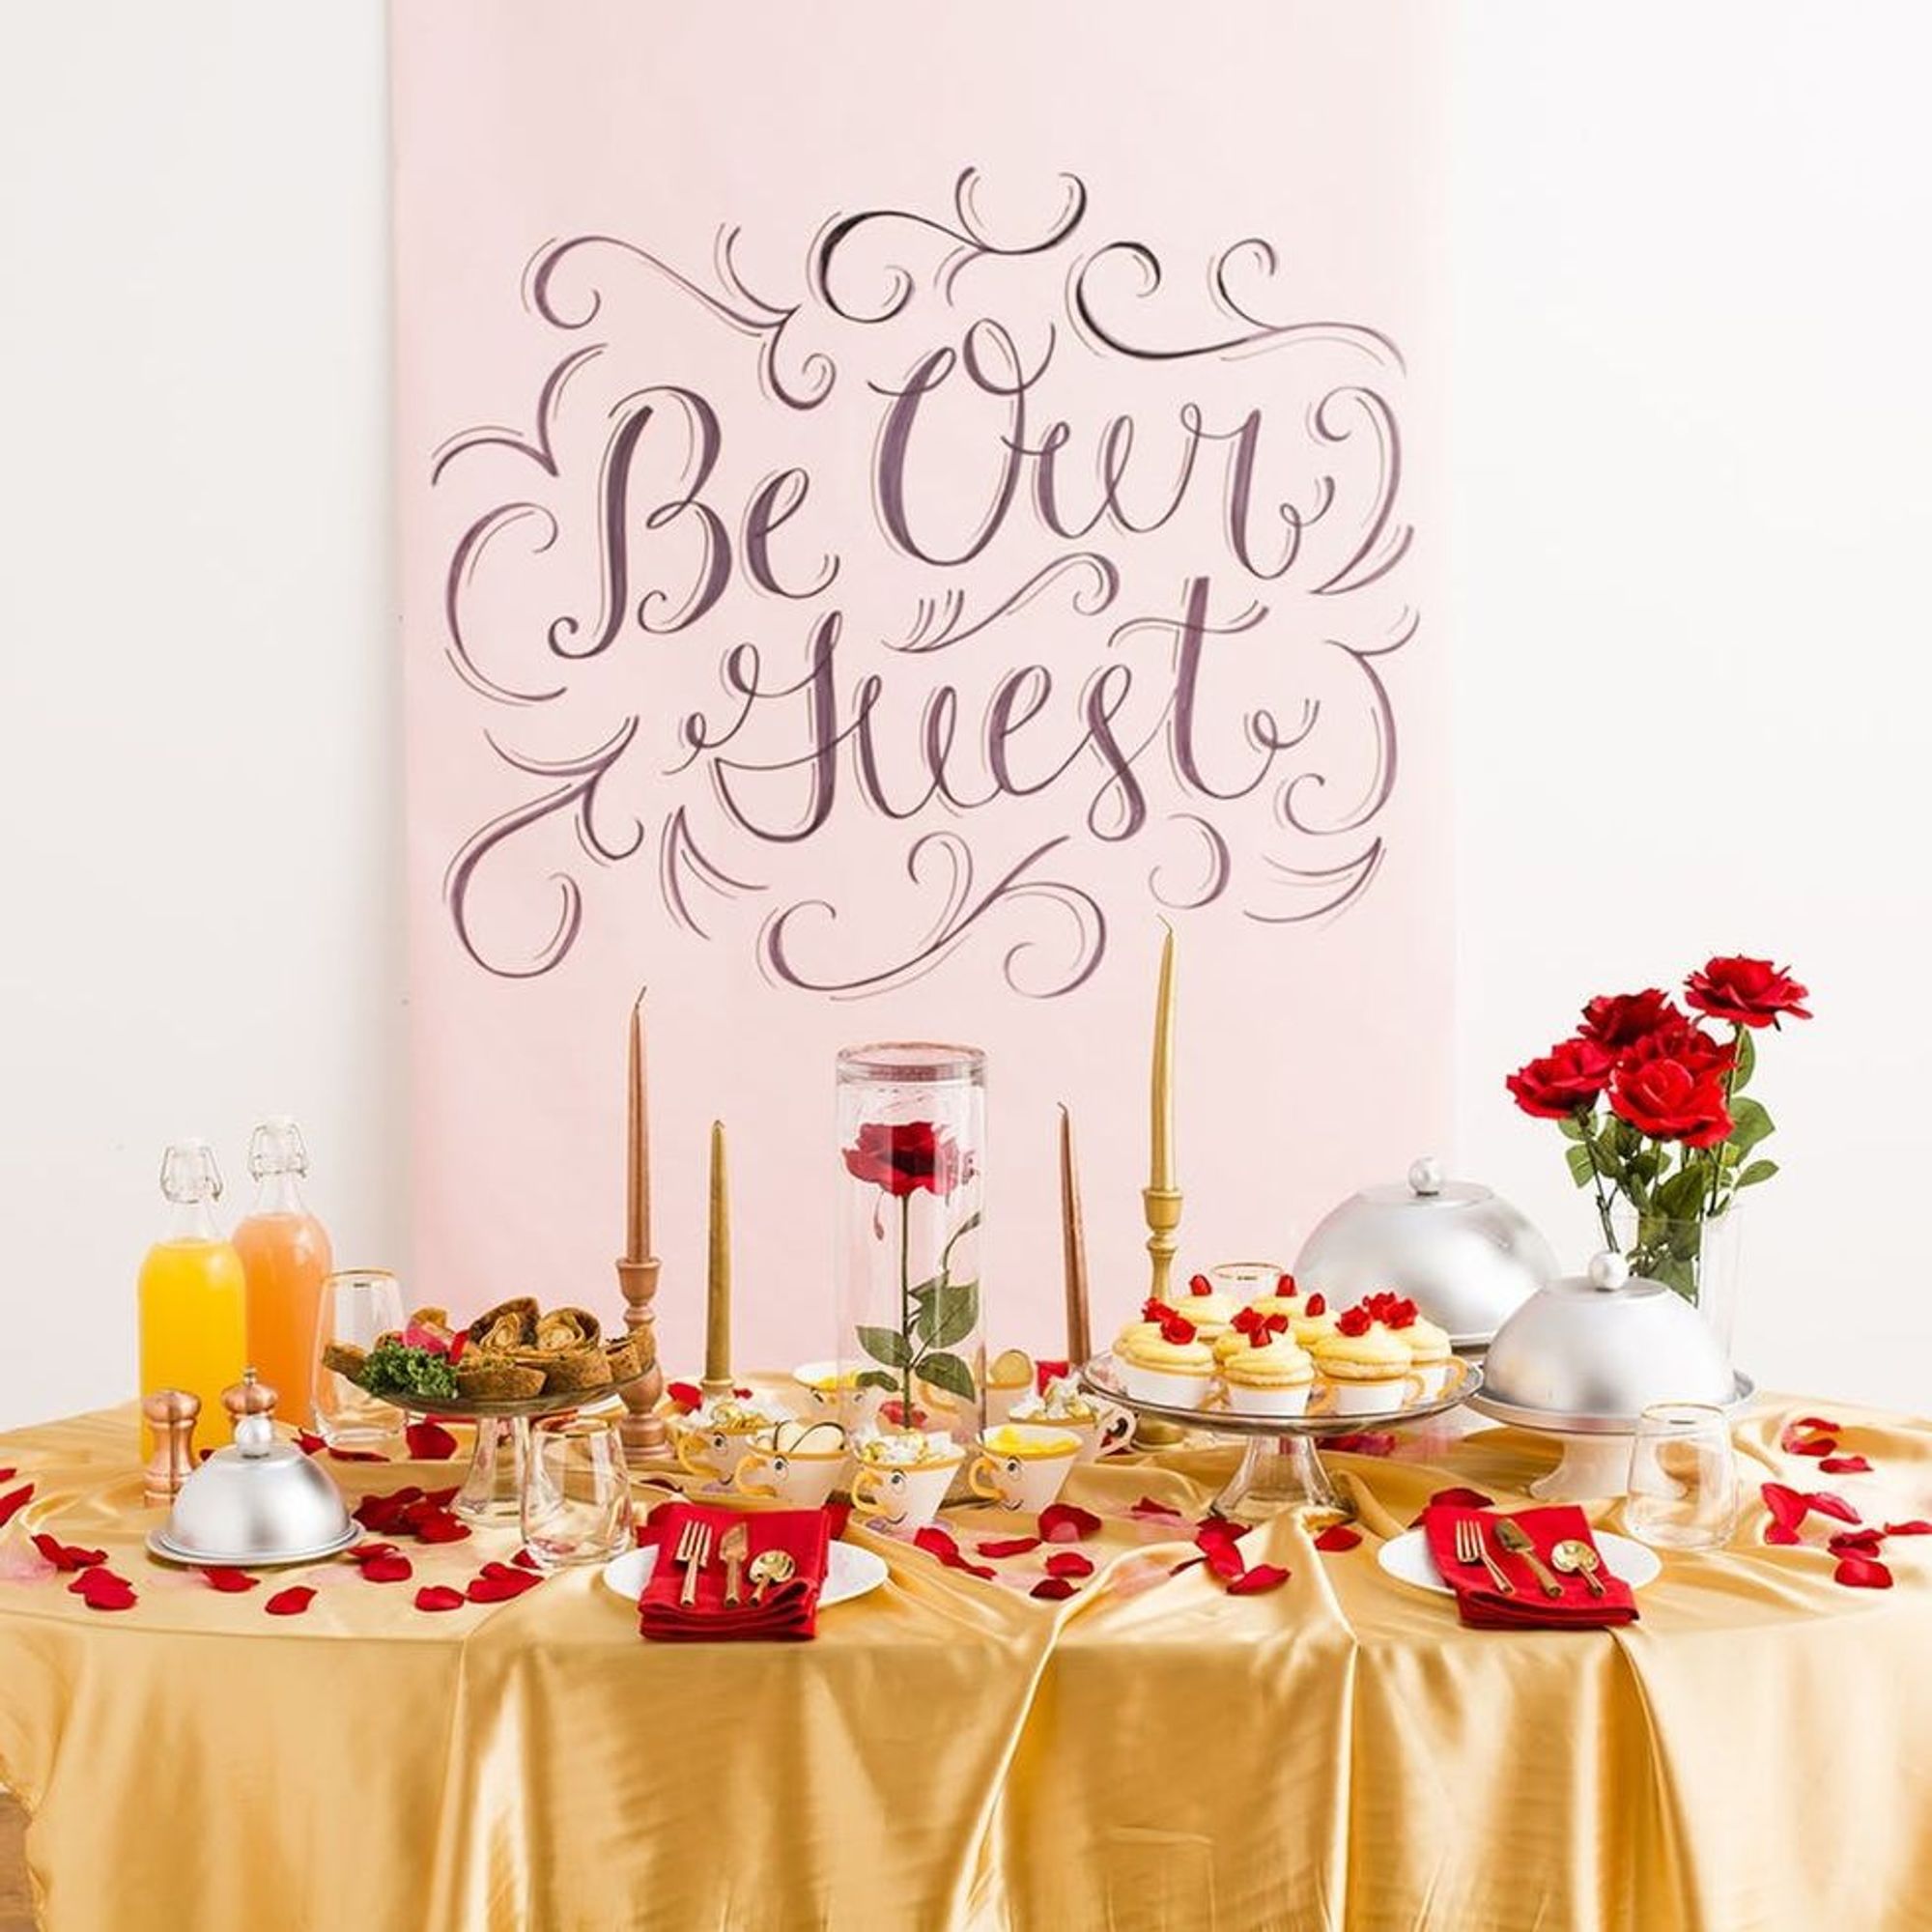 This Beauty And The Beast Inspired Dinner Party Will Enchant The Entire Family Brit Co